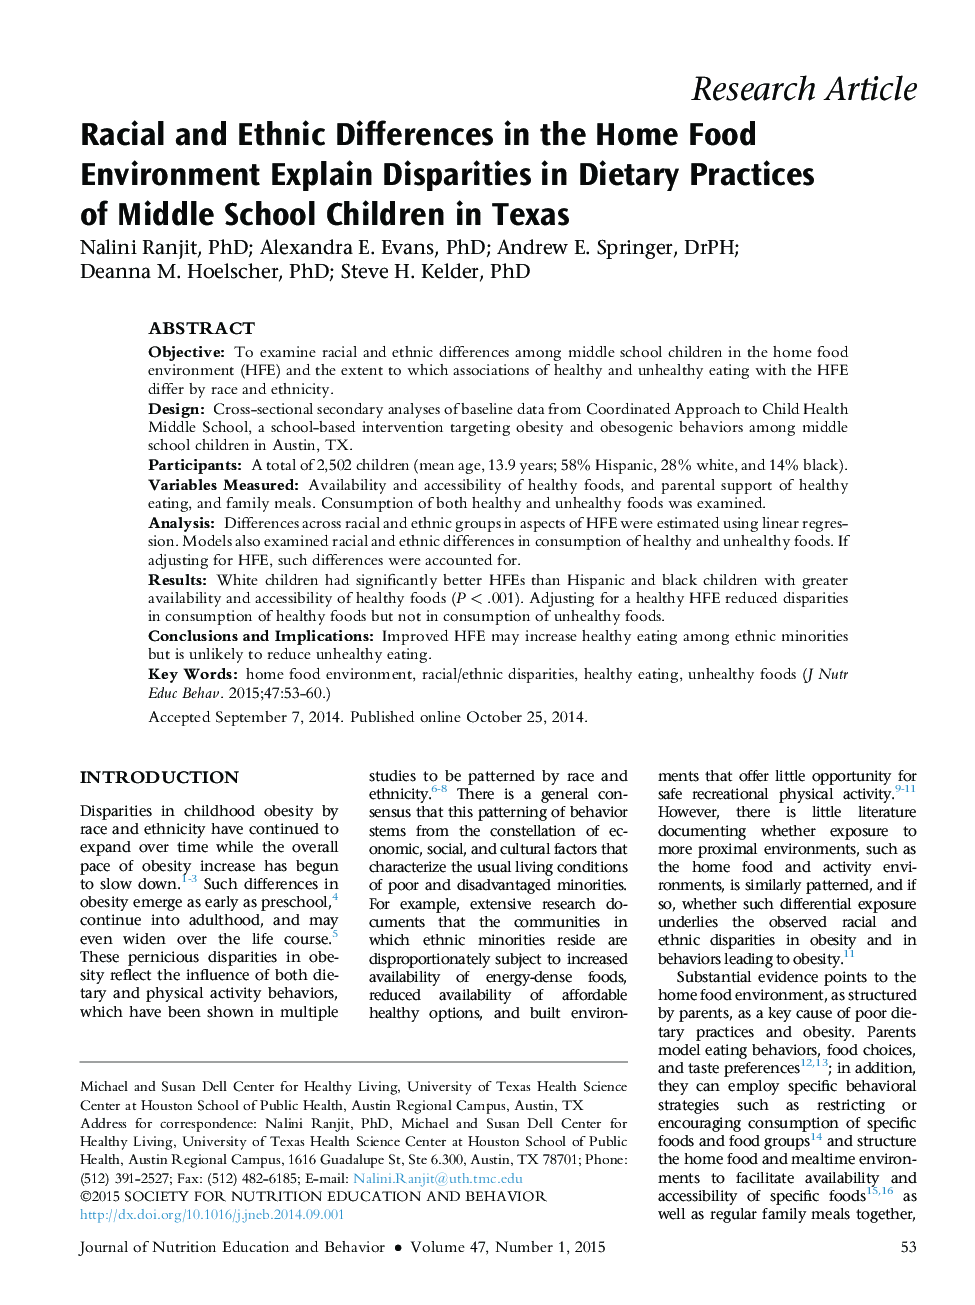 Racial and Ethnic Differences in the Home Food Environment Explain Disparities in Dietary Practices ofÂ Middle School Children in Texas